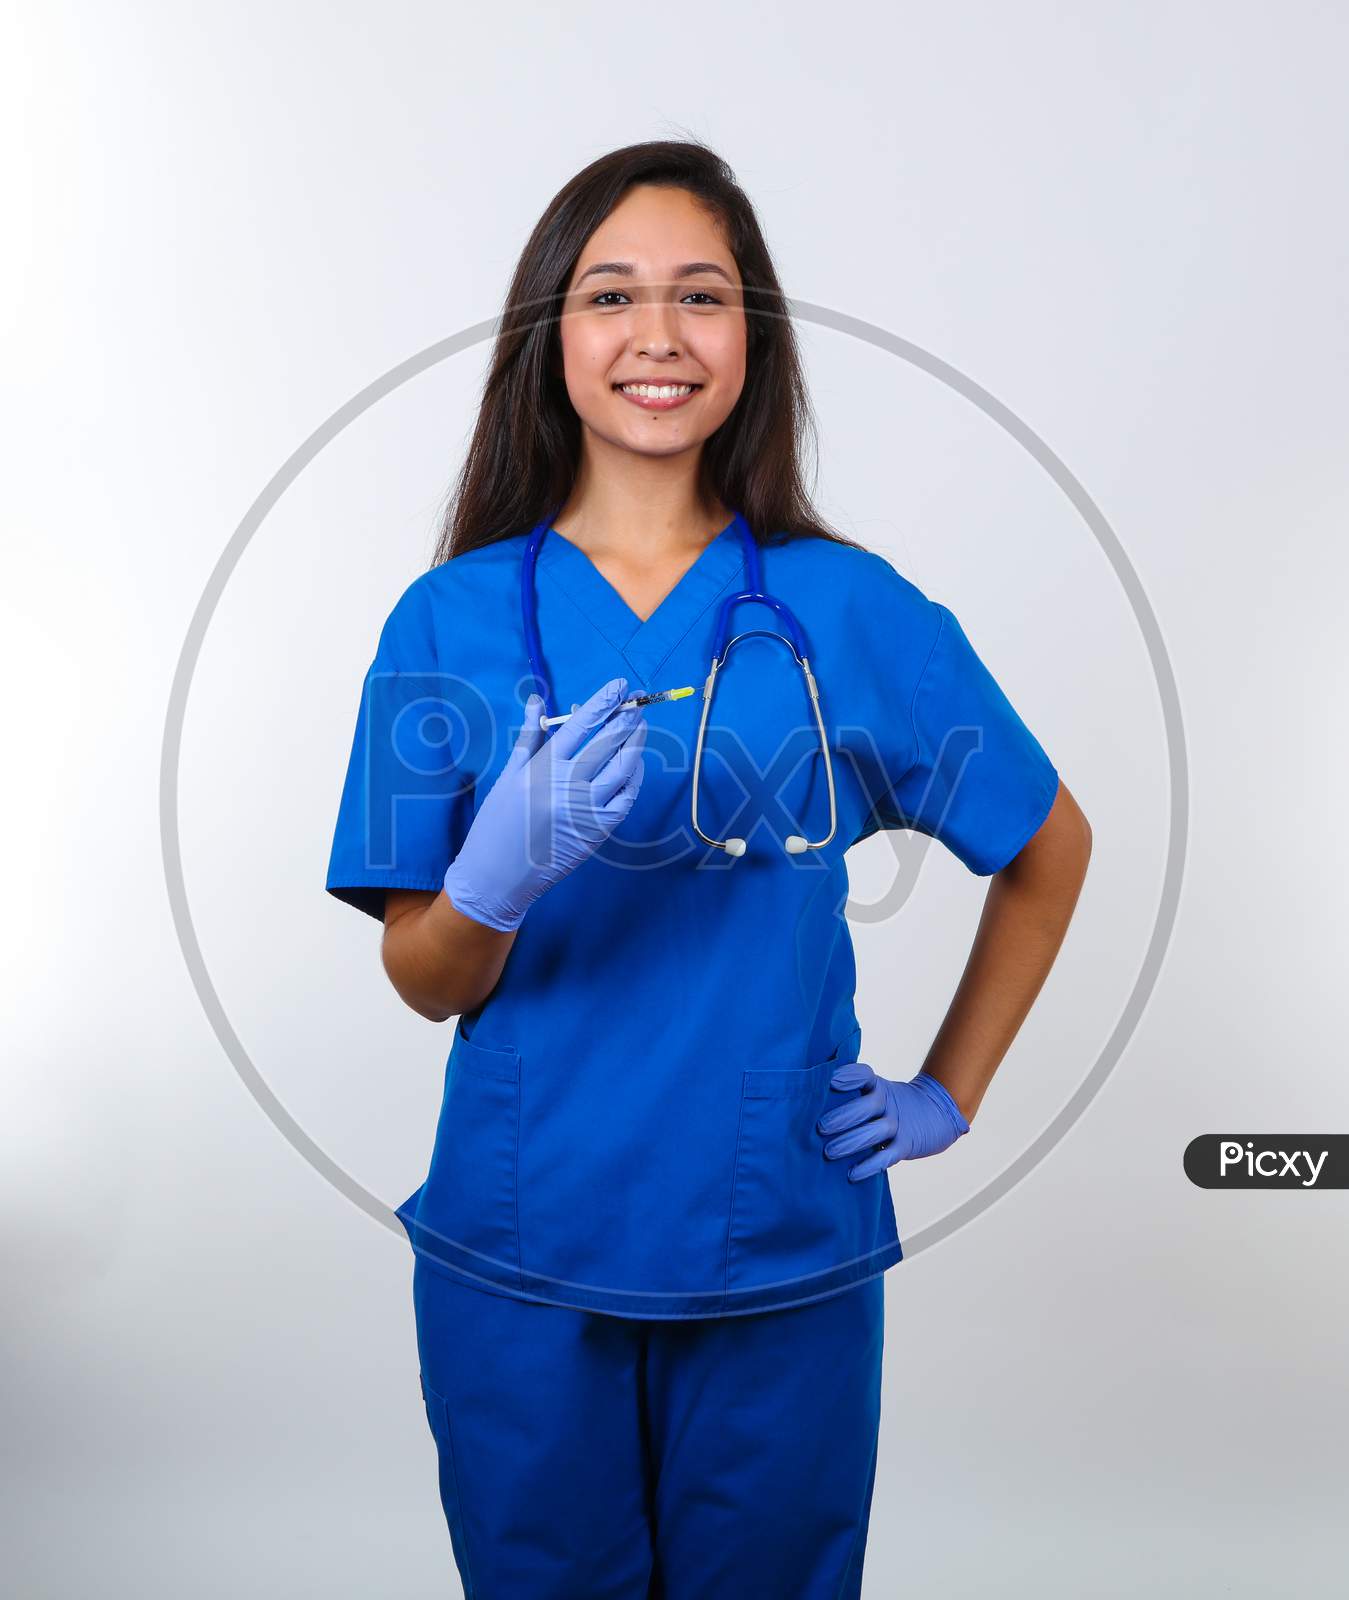 An Attractive Nurse In Blue Scrubs Proudly Holds A Vaccine.